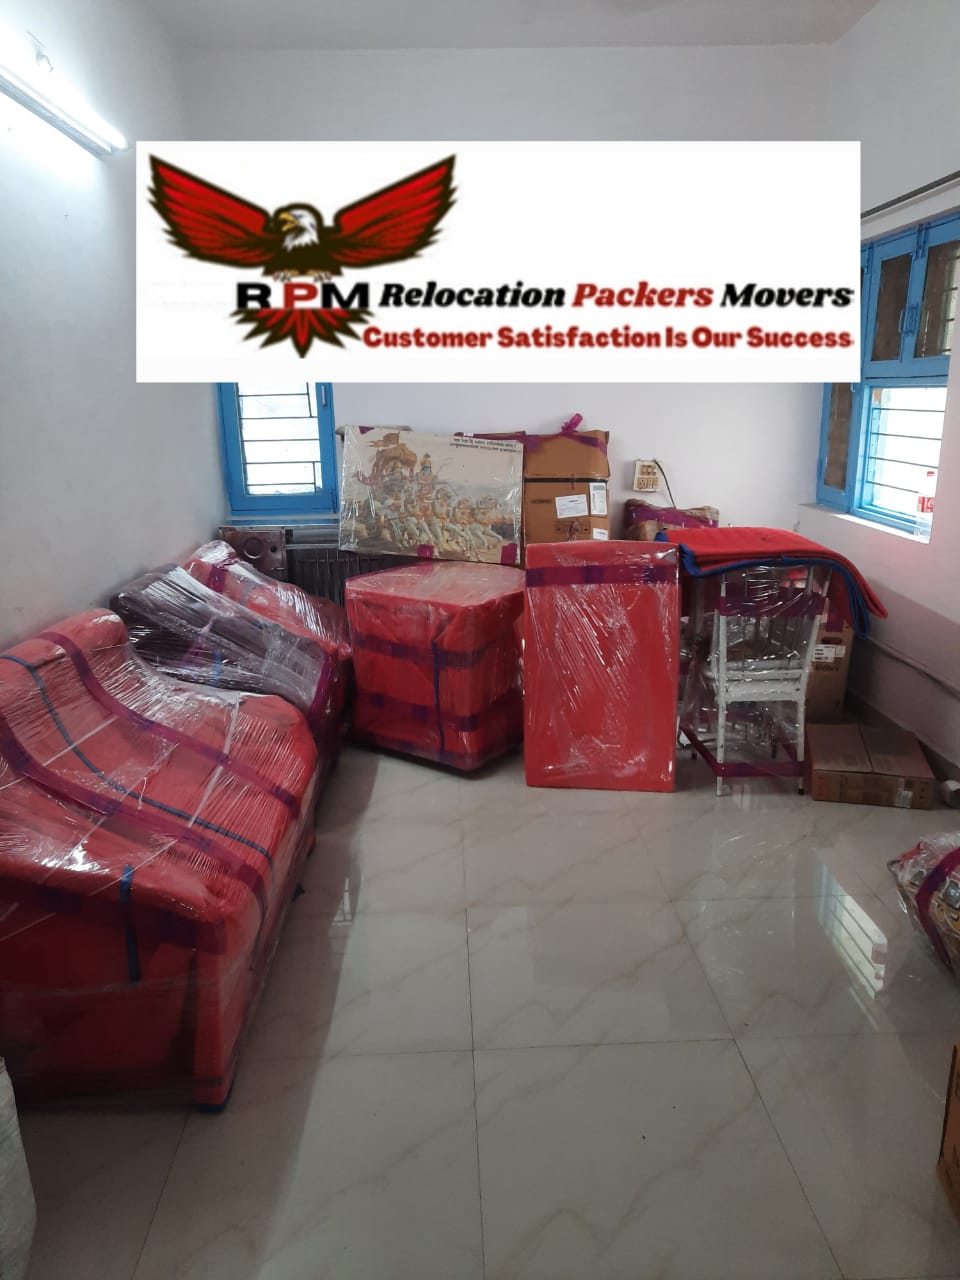 Professional Packers and Movers